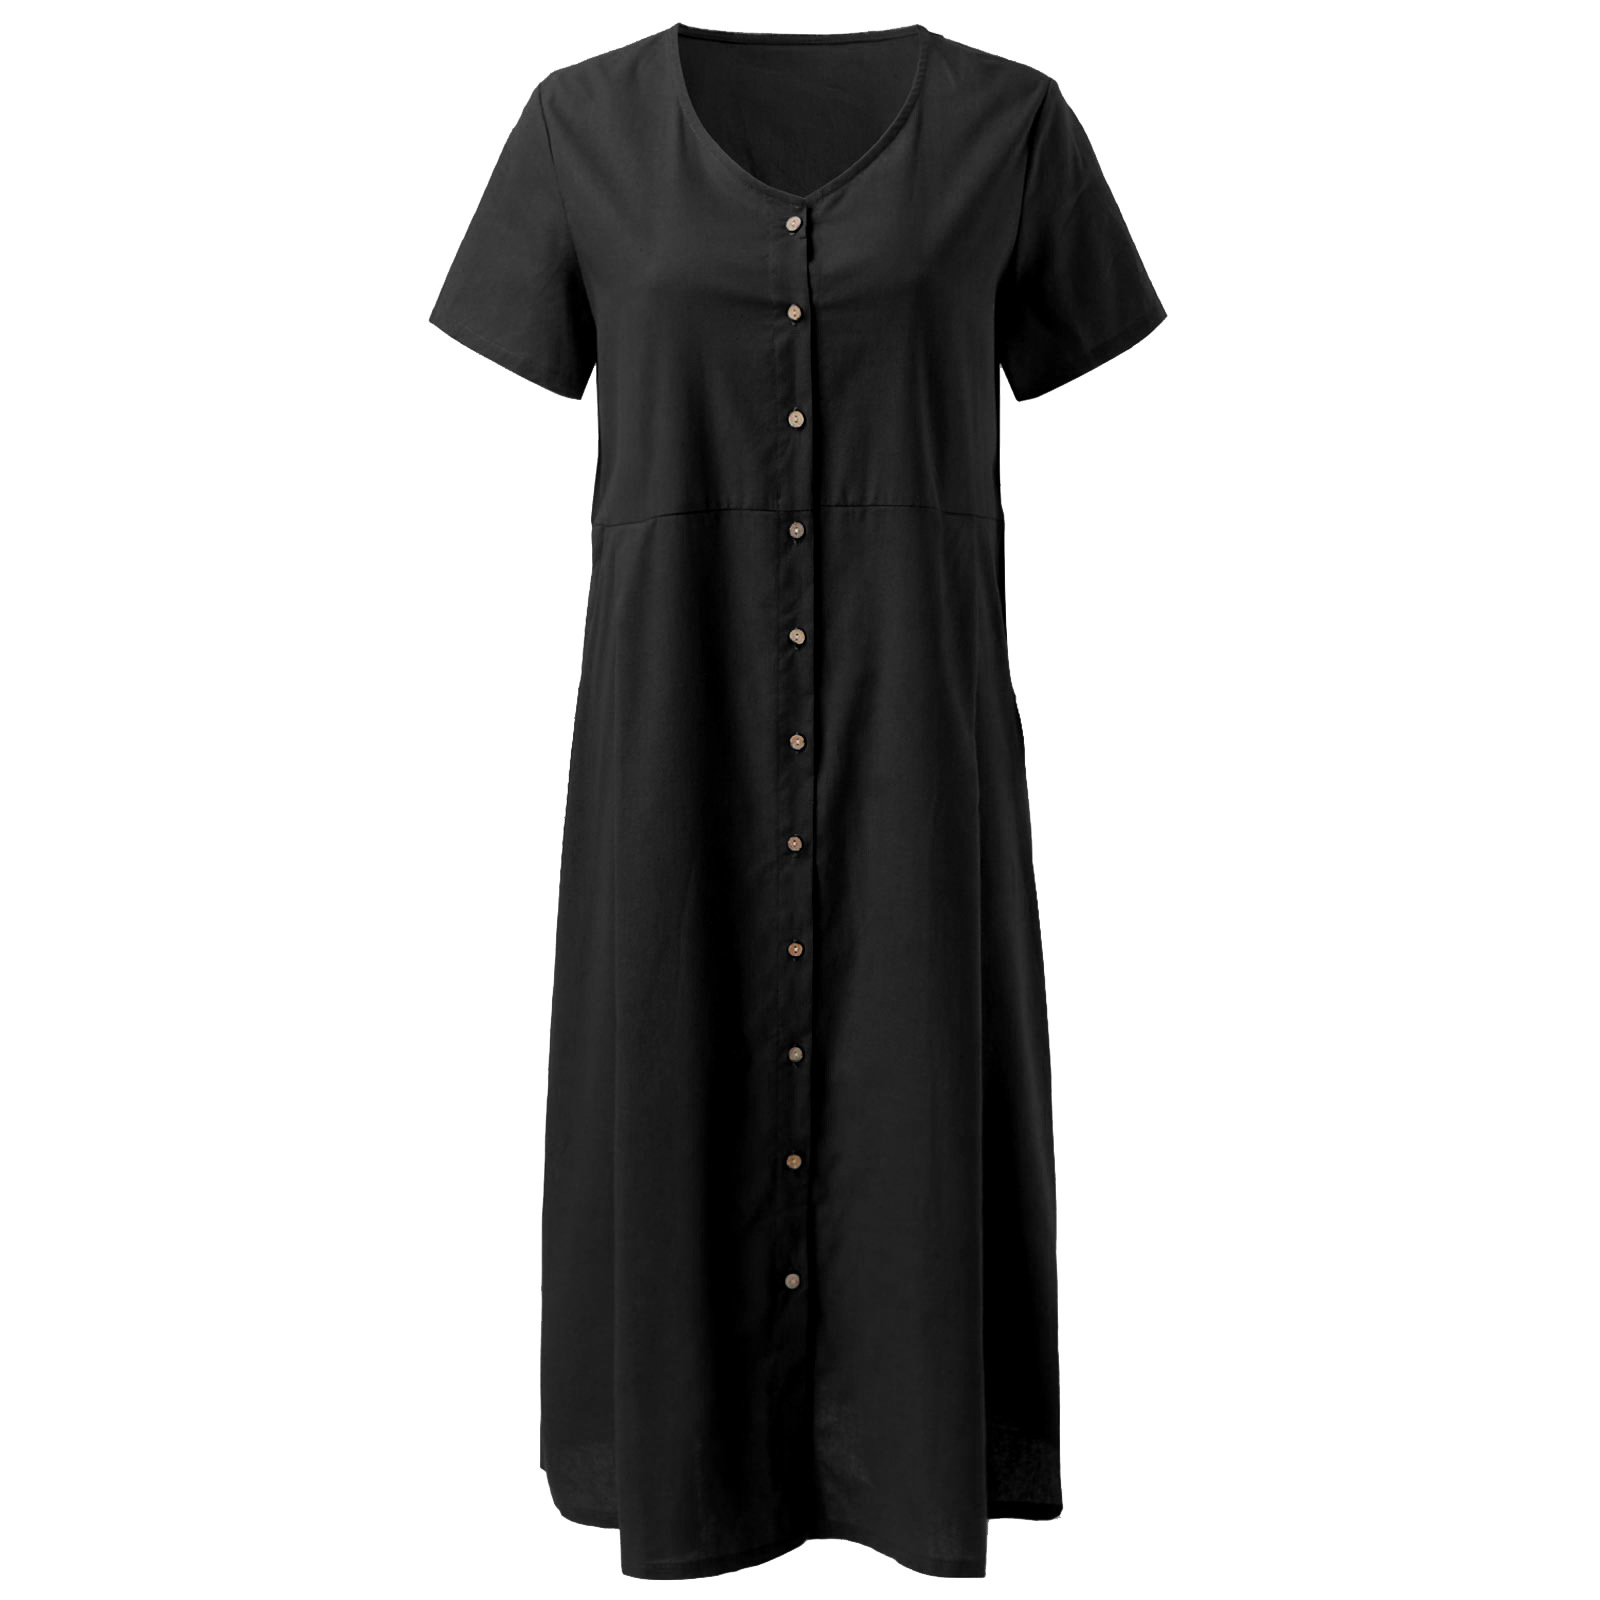 Plus Size Women's Summer Solid Loose Dress